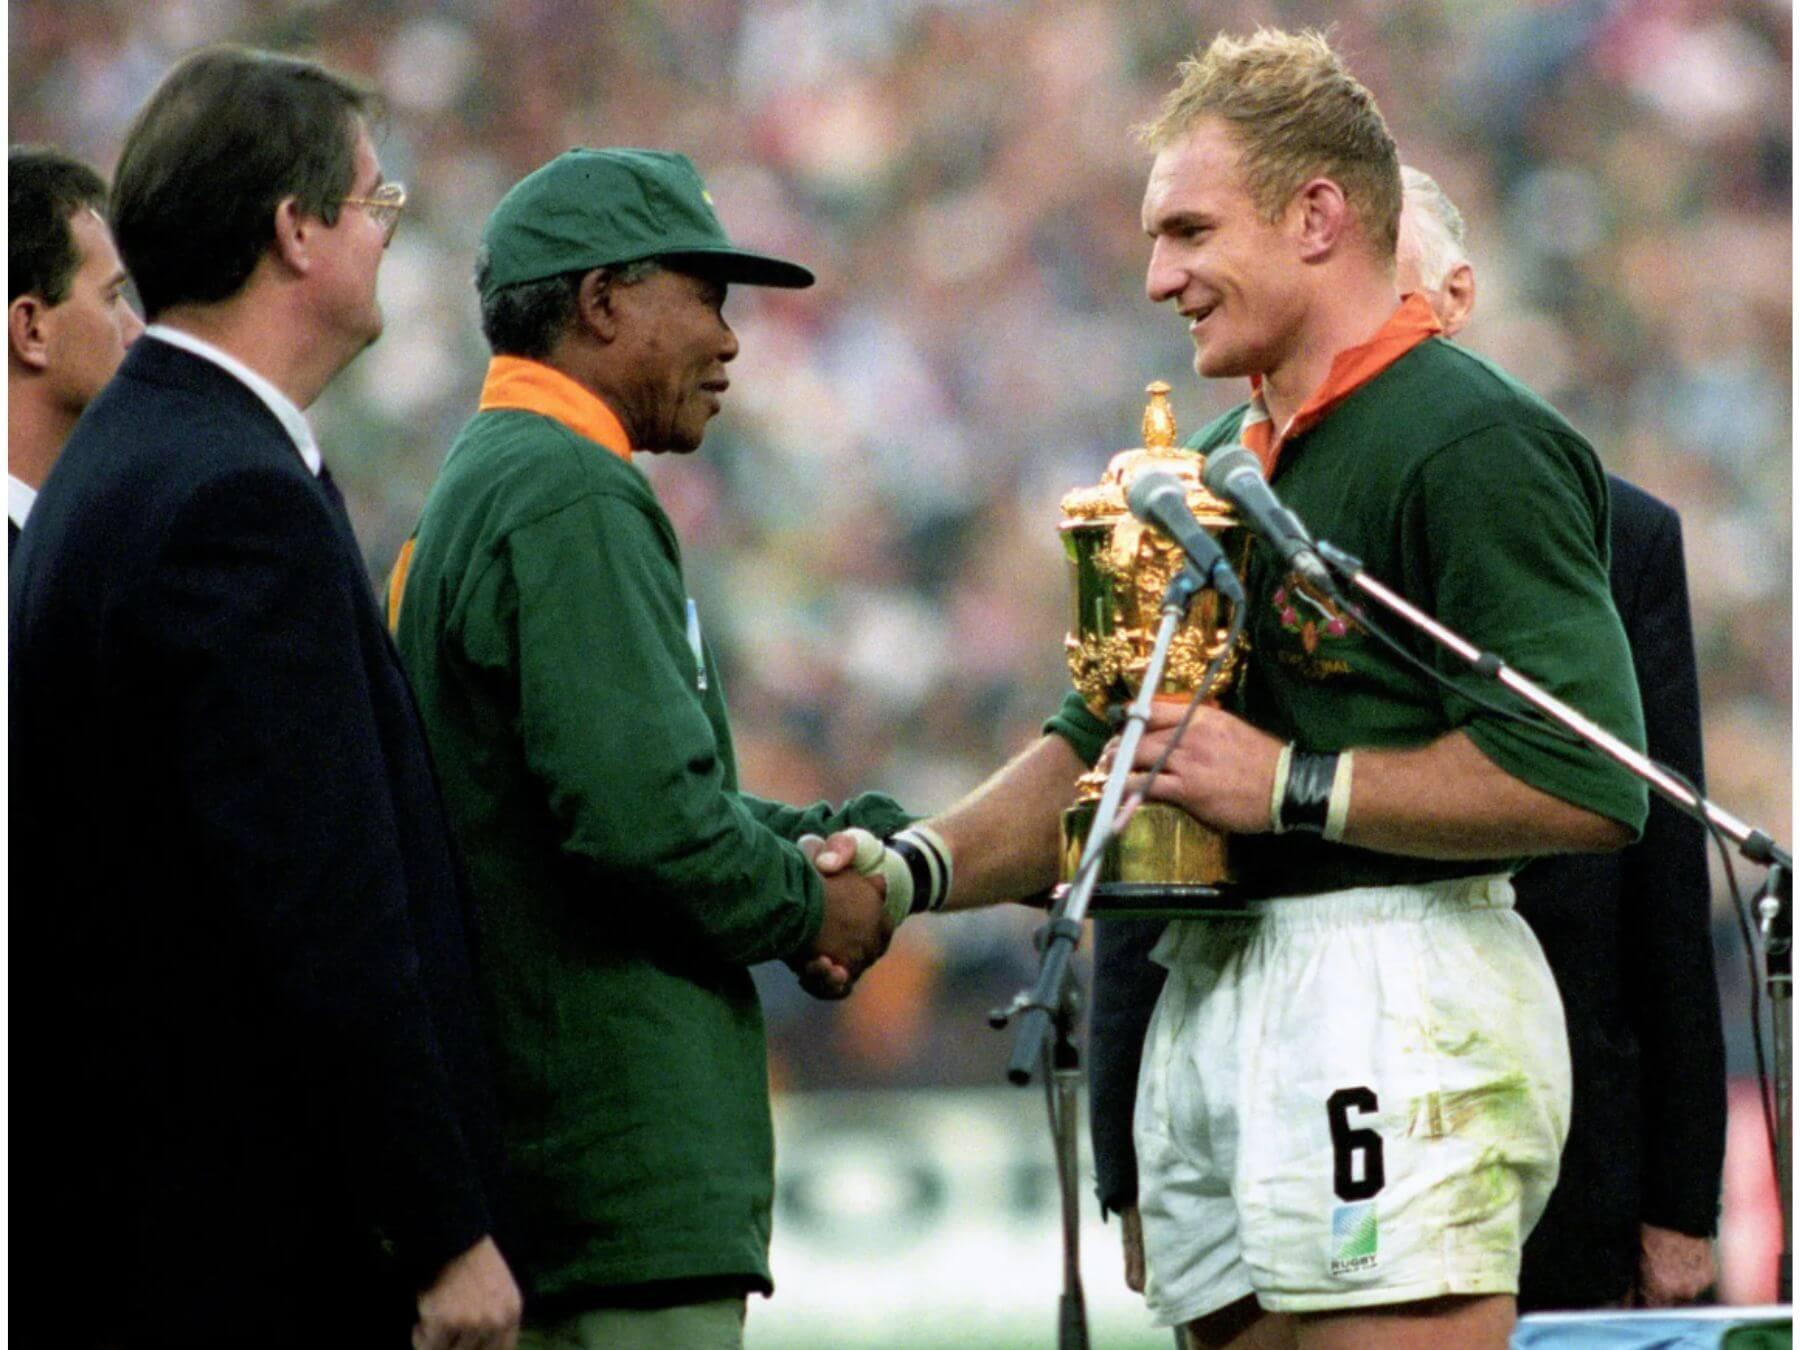 Nelson Mandela and Francois Pienaar shaking hands after winning the Rugby World Cup 1995